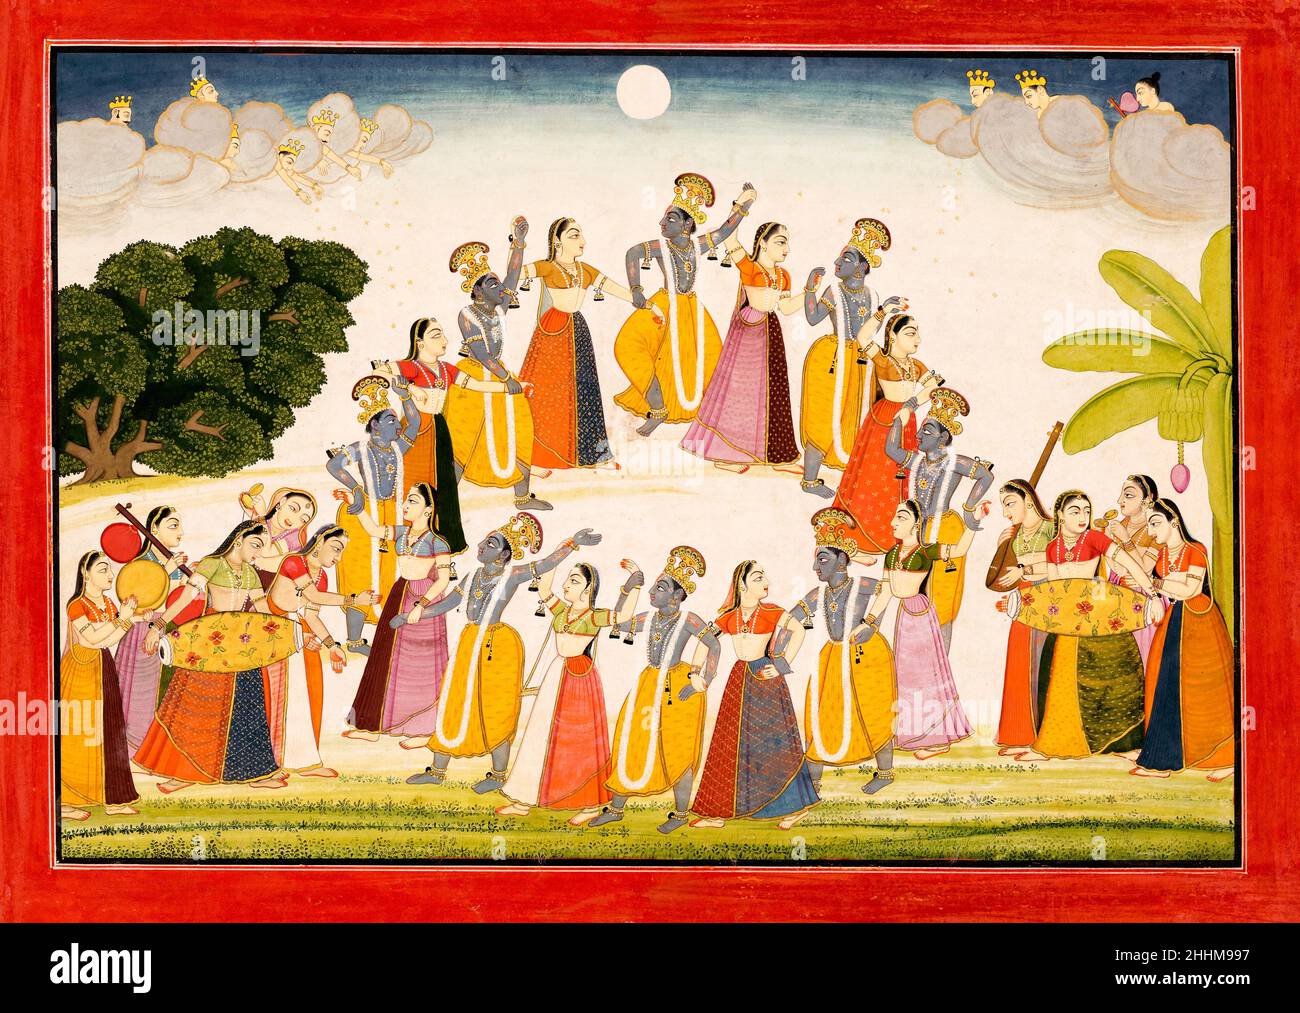 Dance of Krishna and the Gopis from 'A History of the Lord' (Bhagavata Purana), painting by unknown Indian artist, 1760-1765 Stock Photo